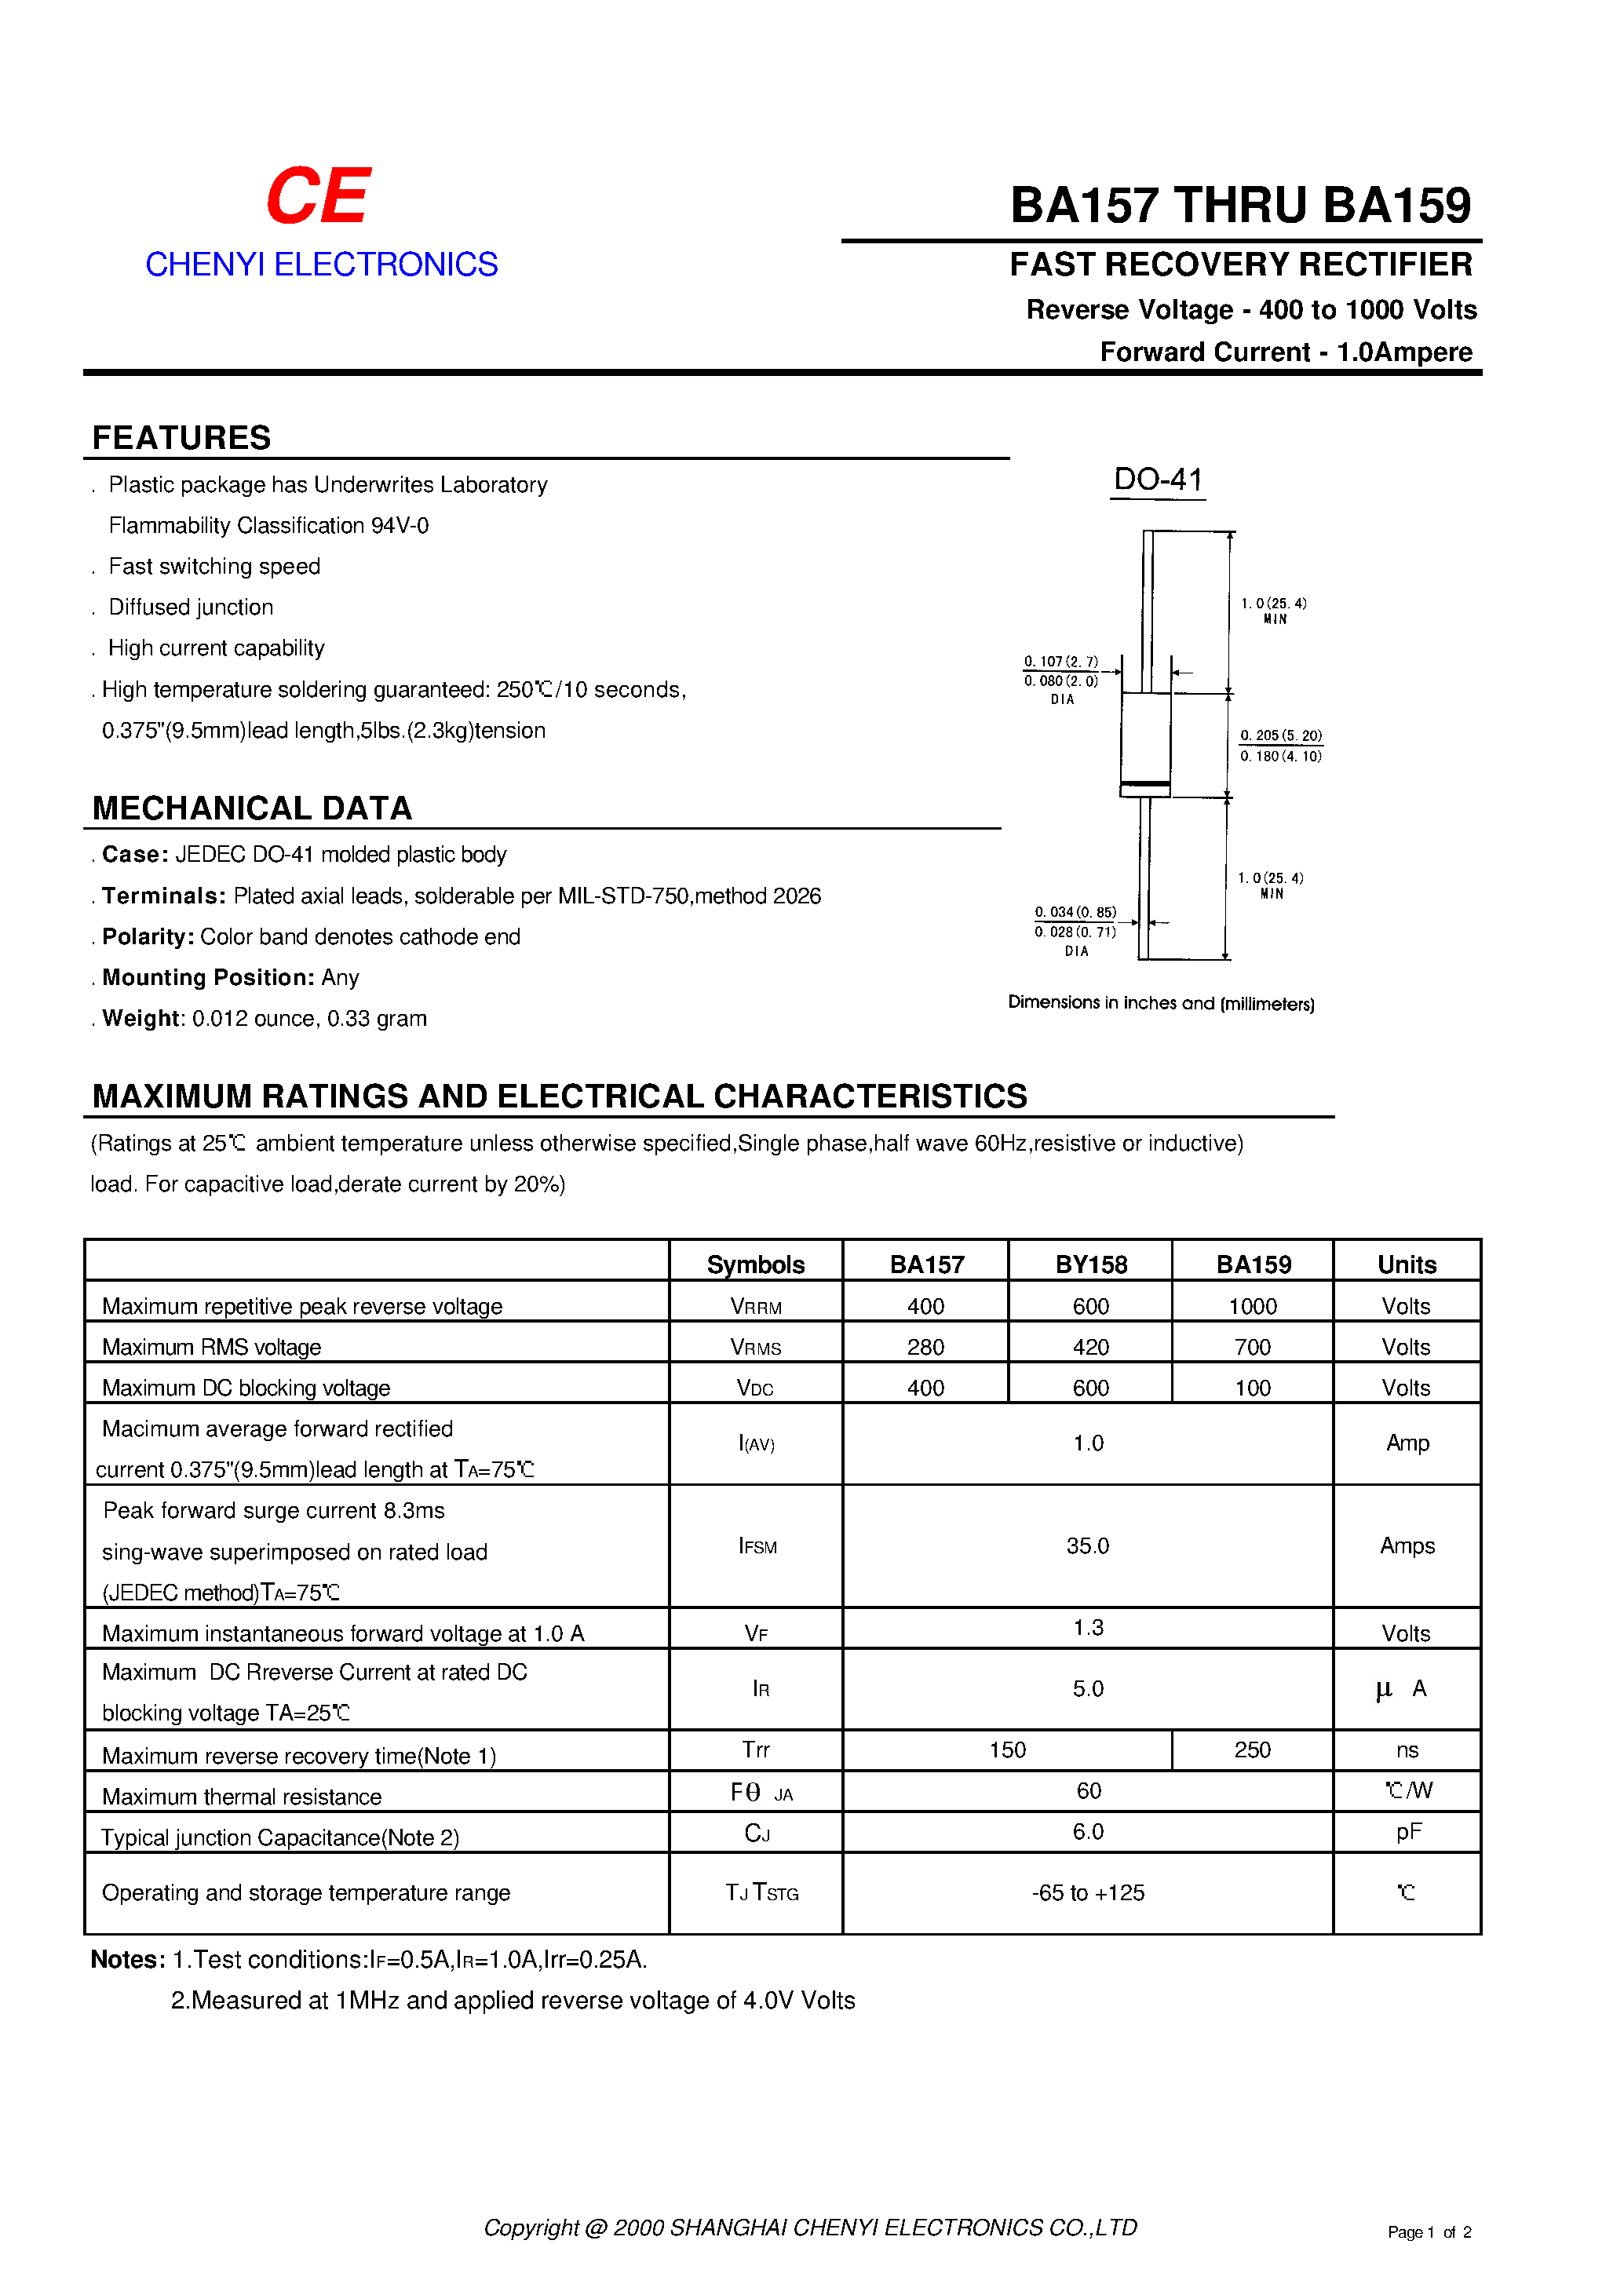 Datasheet BY158 - FAST RECOVERY RECTIFIER page 1